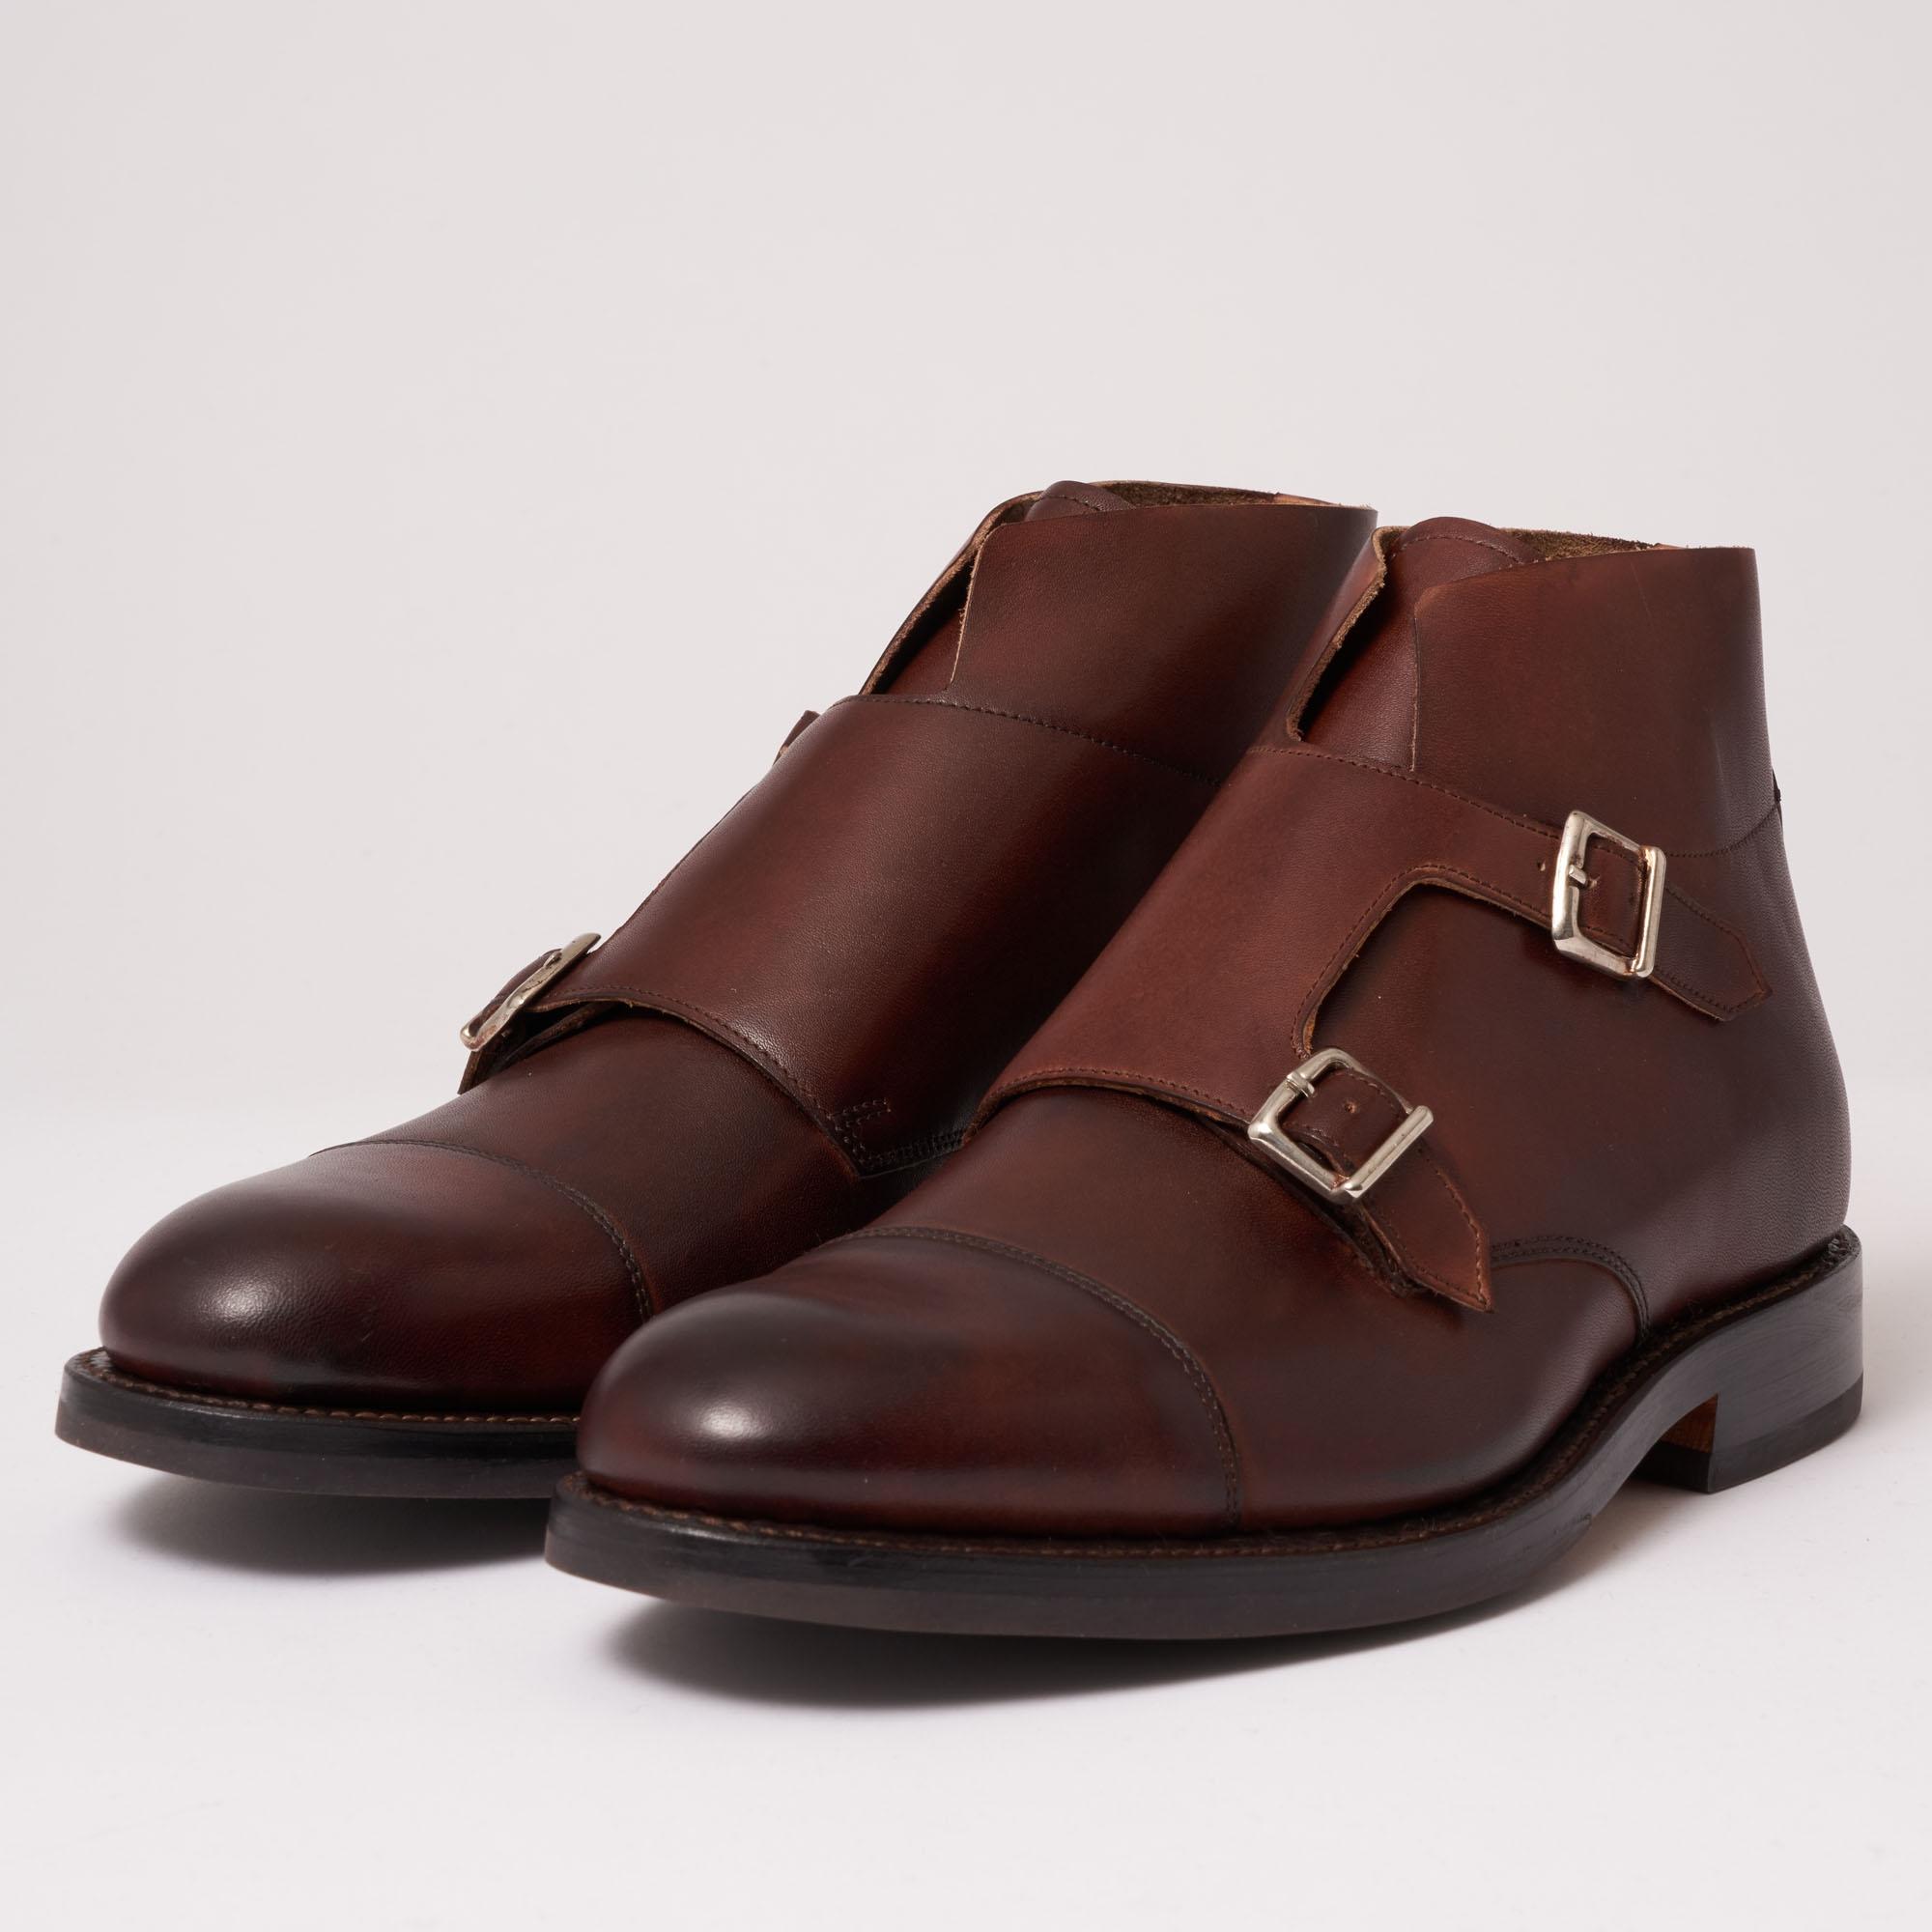 Grenson Leather Hansel Double Monk Strap Boot in Brown for Men - Lyst